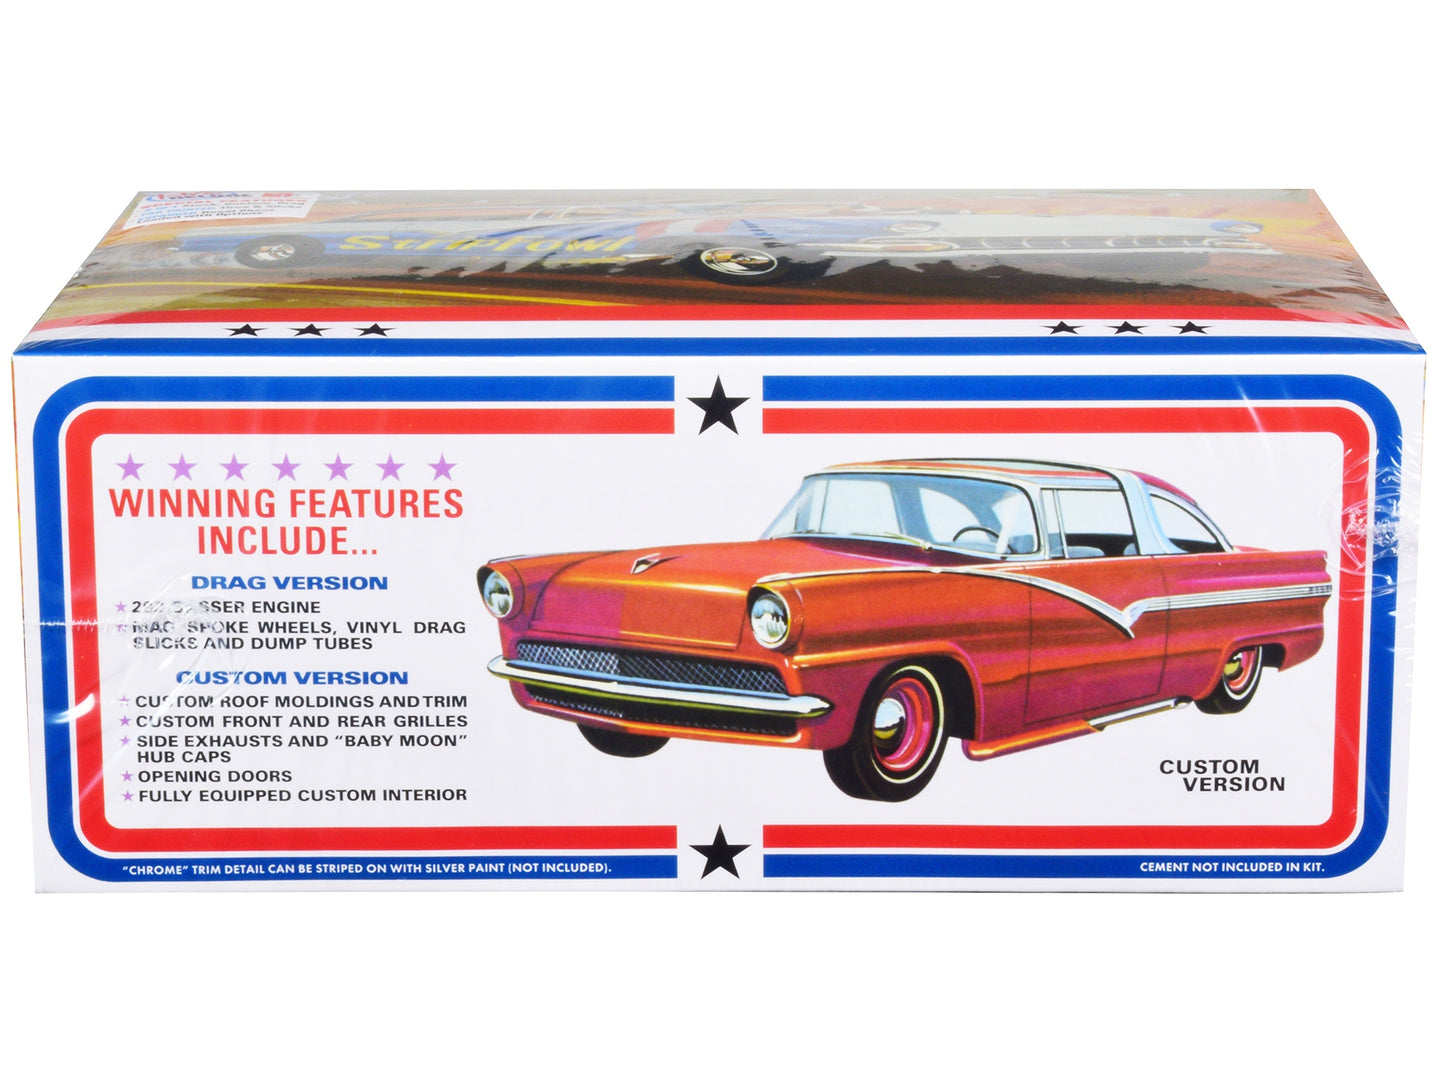 Skill 2 Model Kit 1956 Ford Victoria Hardtop 3 in 1 Kit 1/25 Scale Model by AMT